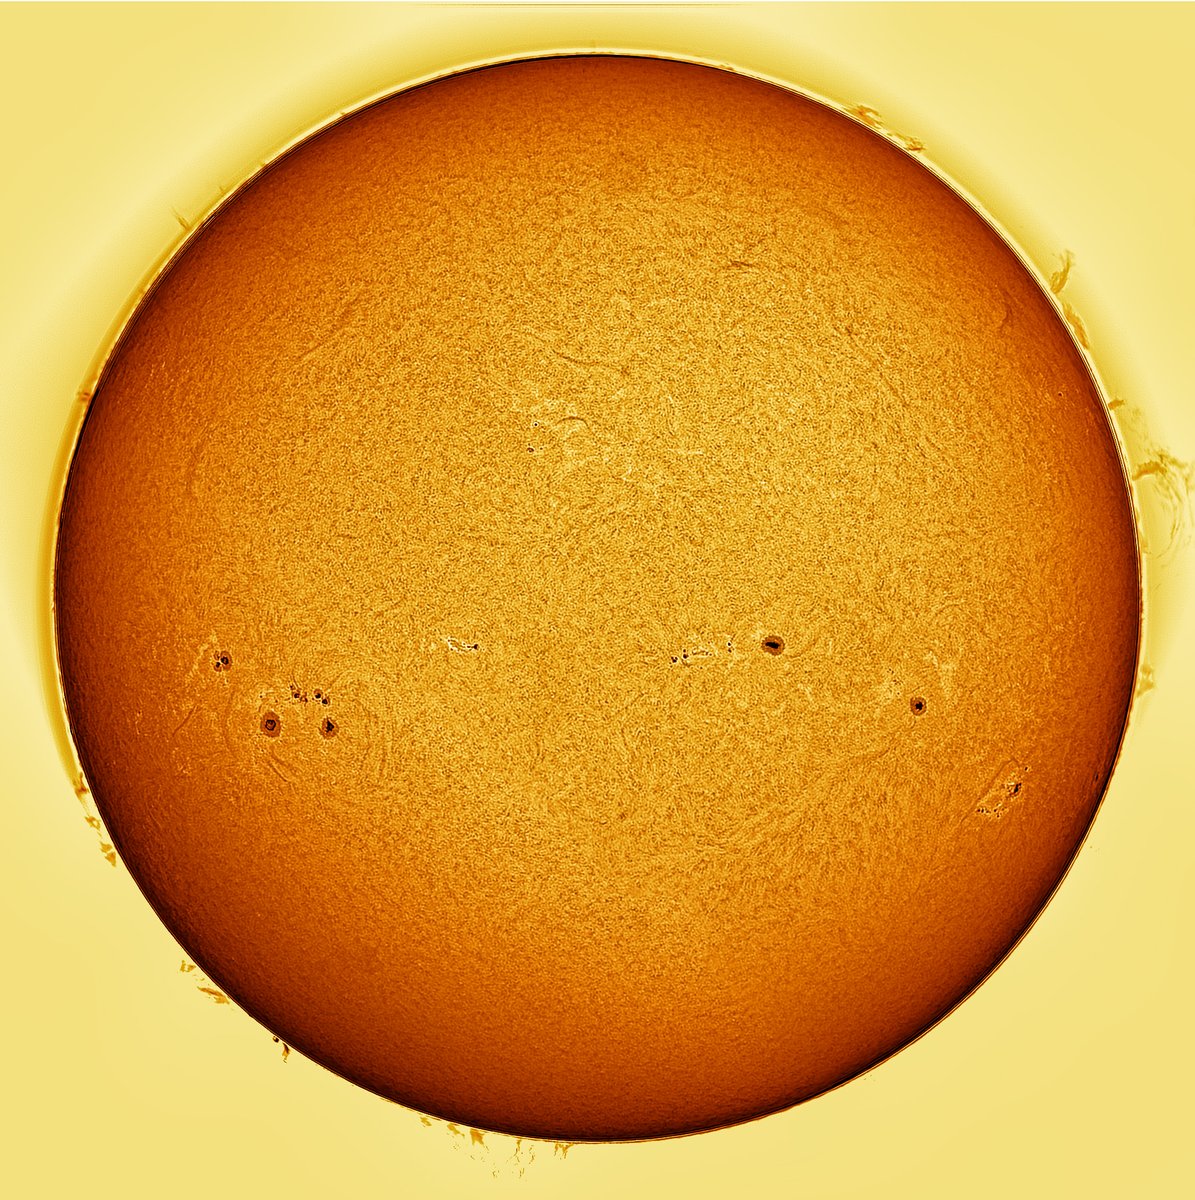 Sunday's Sun in Ha. Lots of activity on and around it today. @MoonHourSocial #astronomy #astrophotography @ThePhotoHour